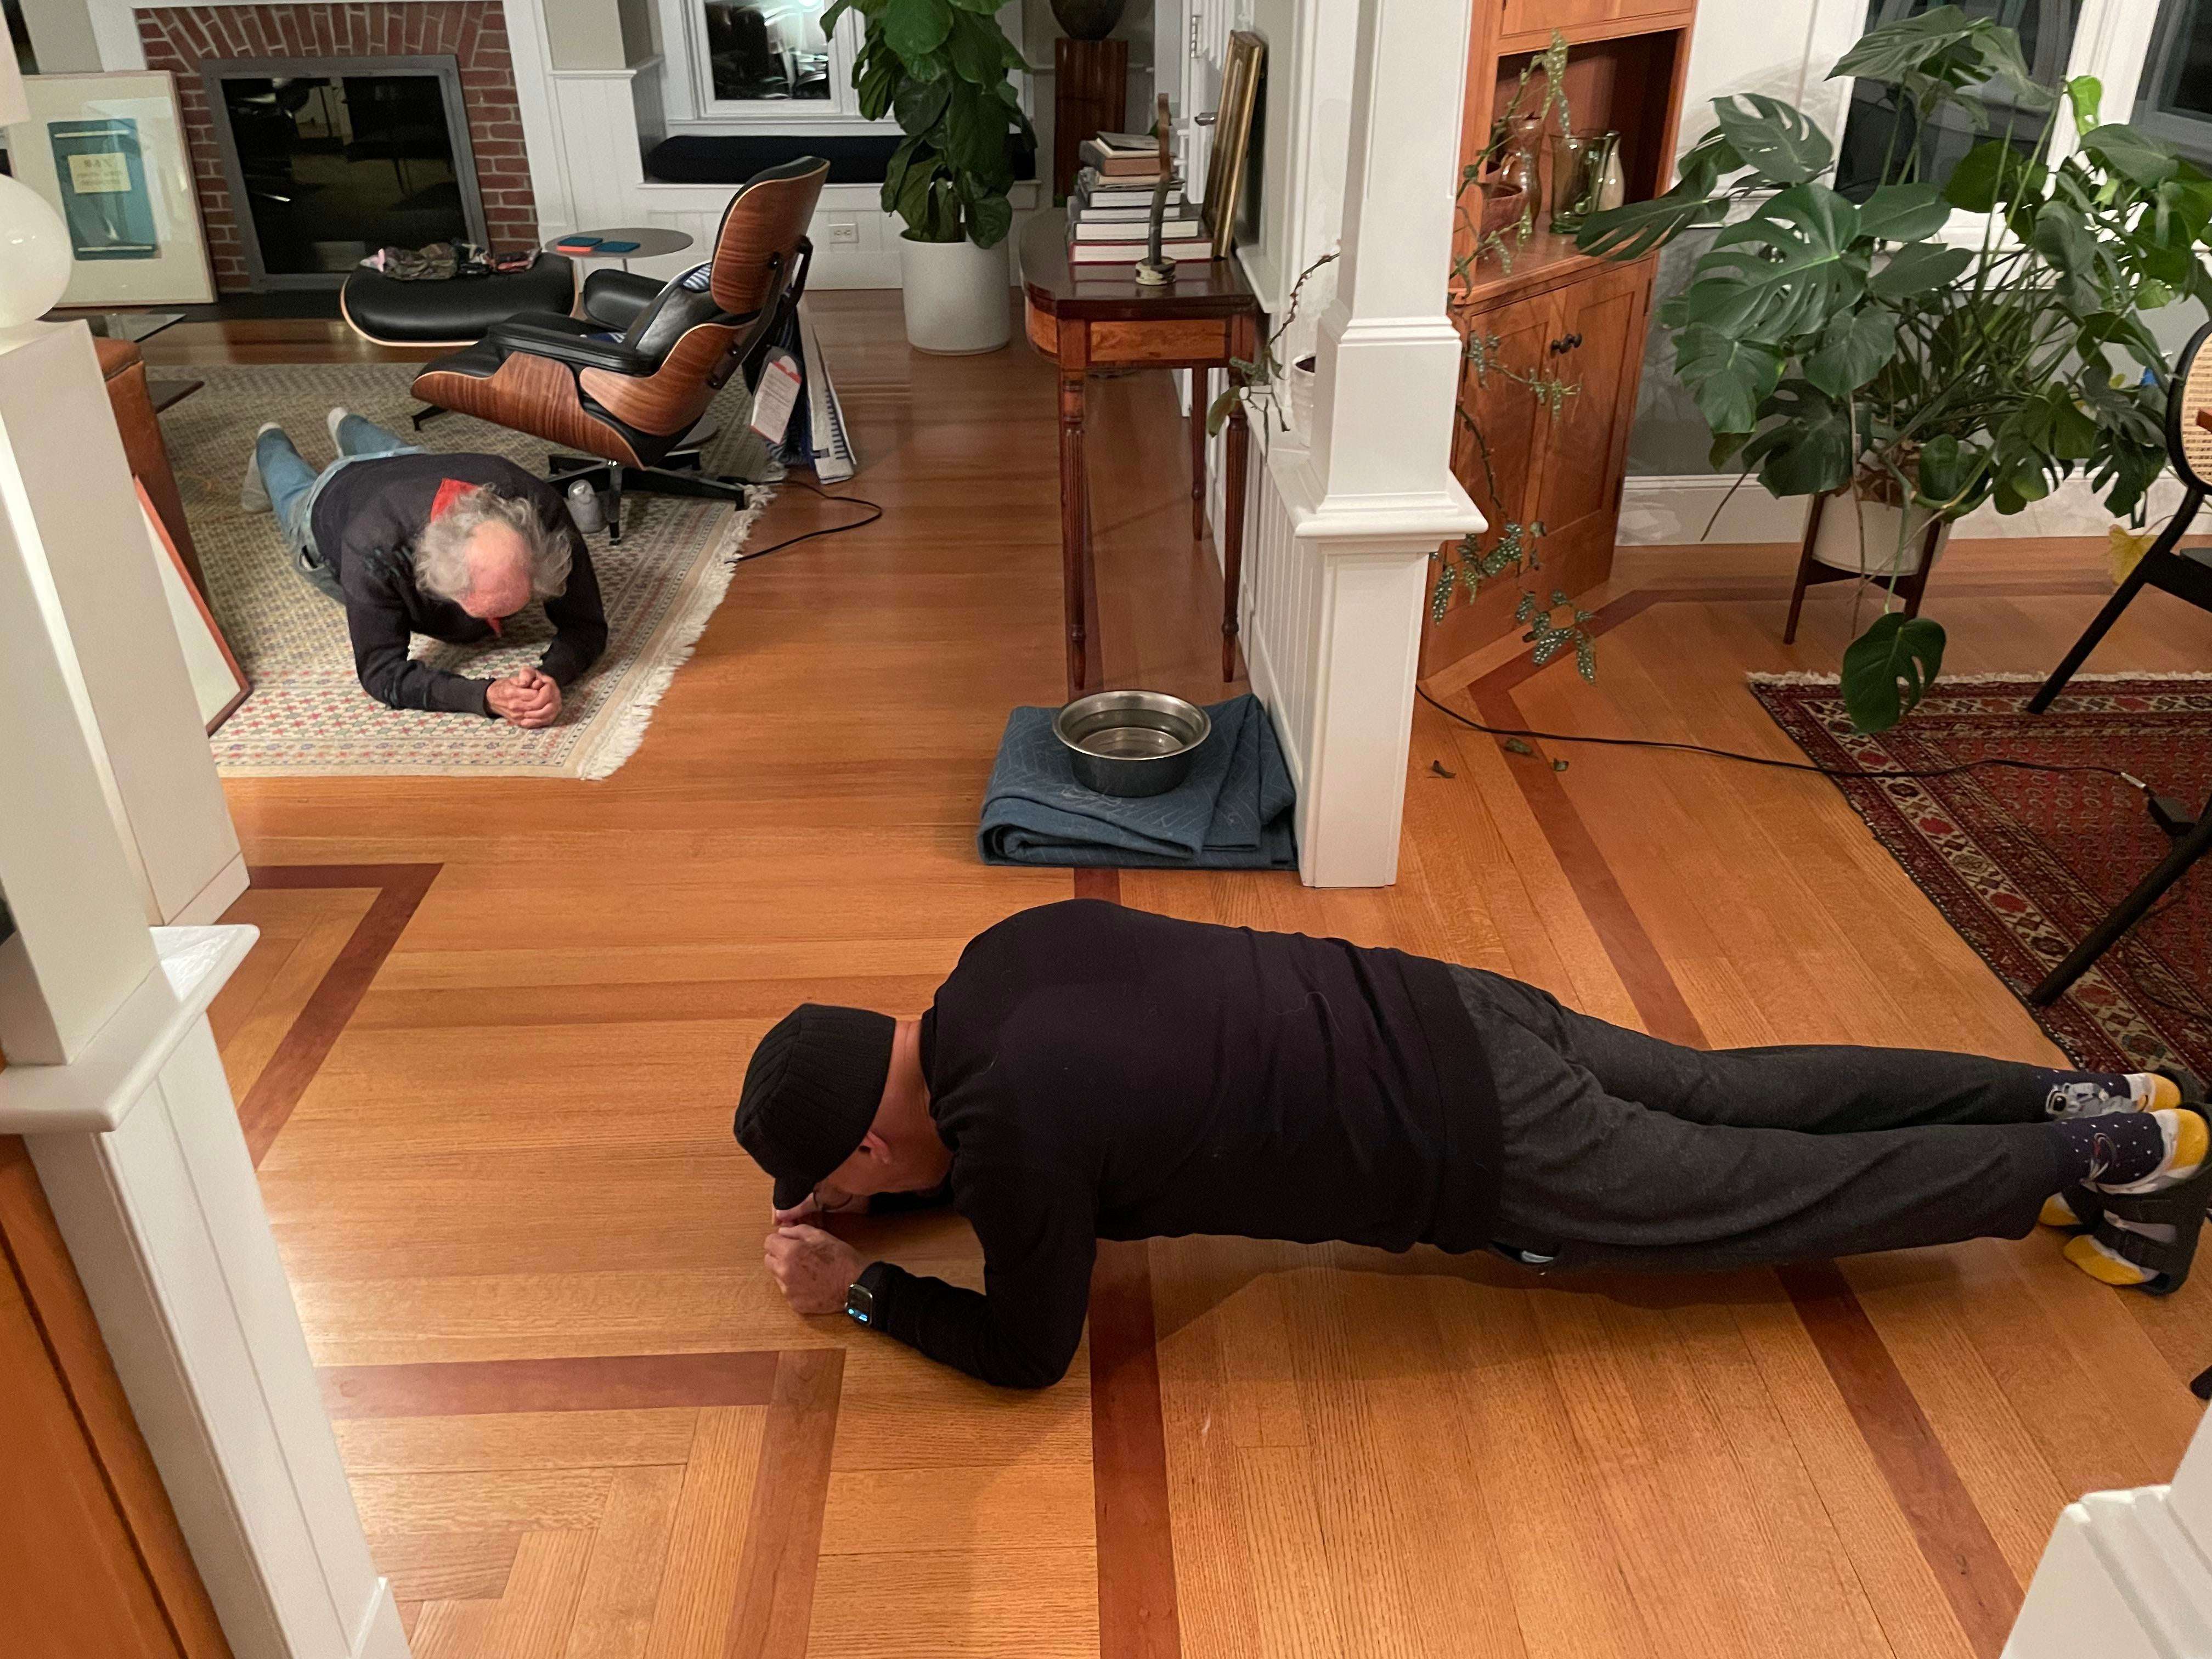 image showing Our 80 yo friend is visiting. Our 75 yo neighbor brought him some weed and now they’re planking.